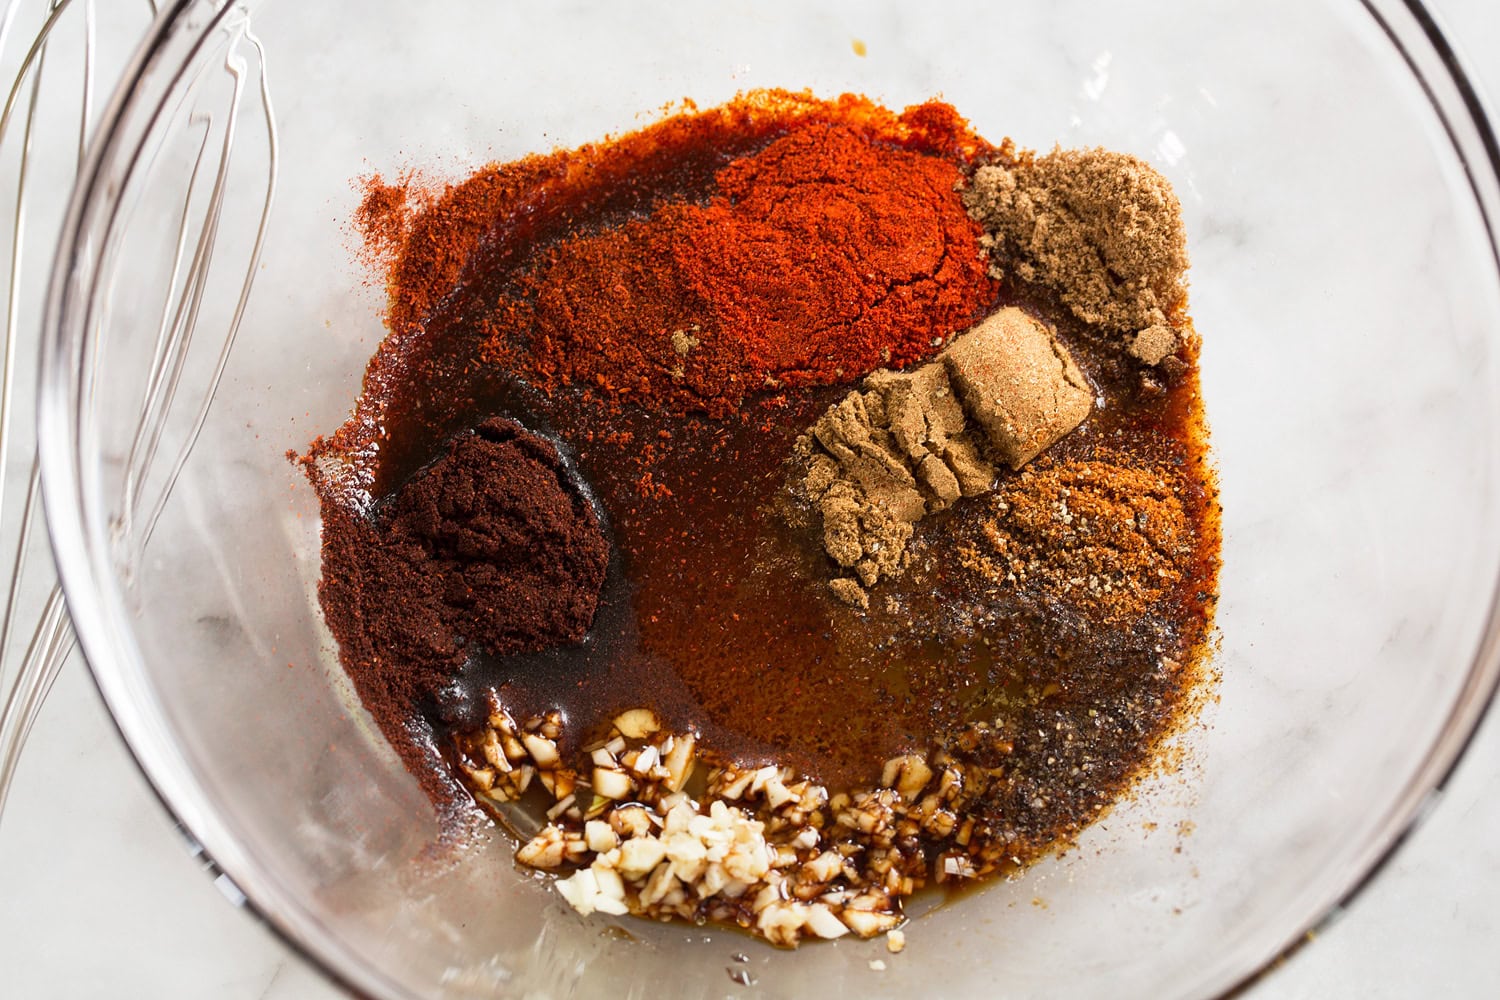 Mixing spice seasoning in a glass mixing bowl.